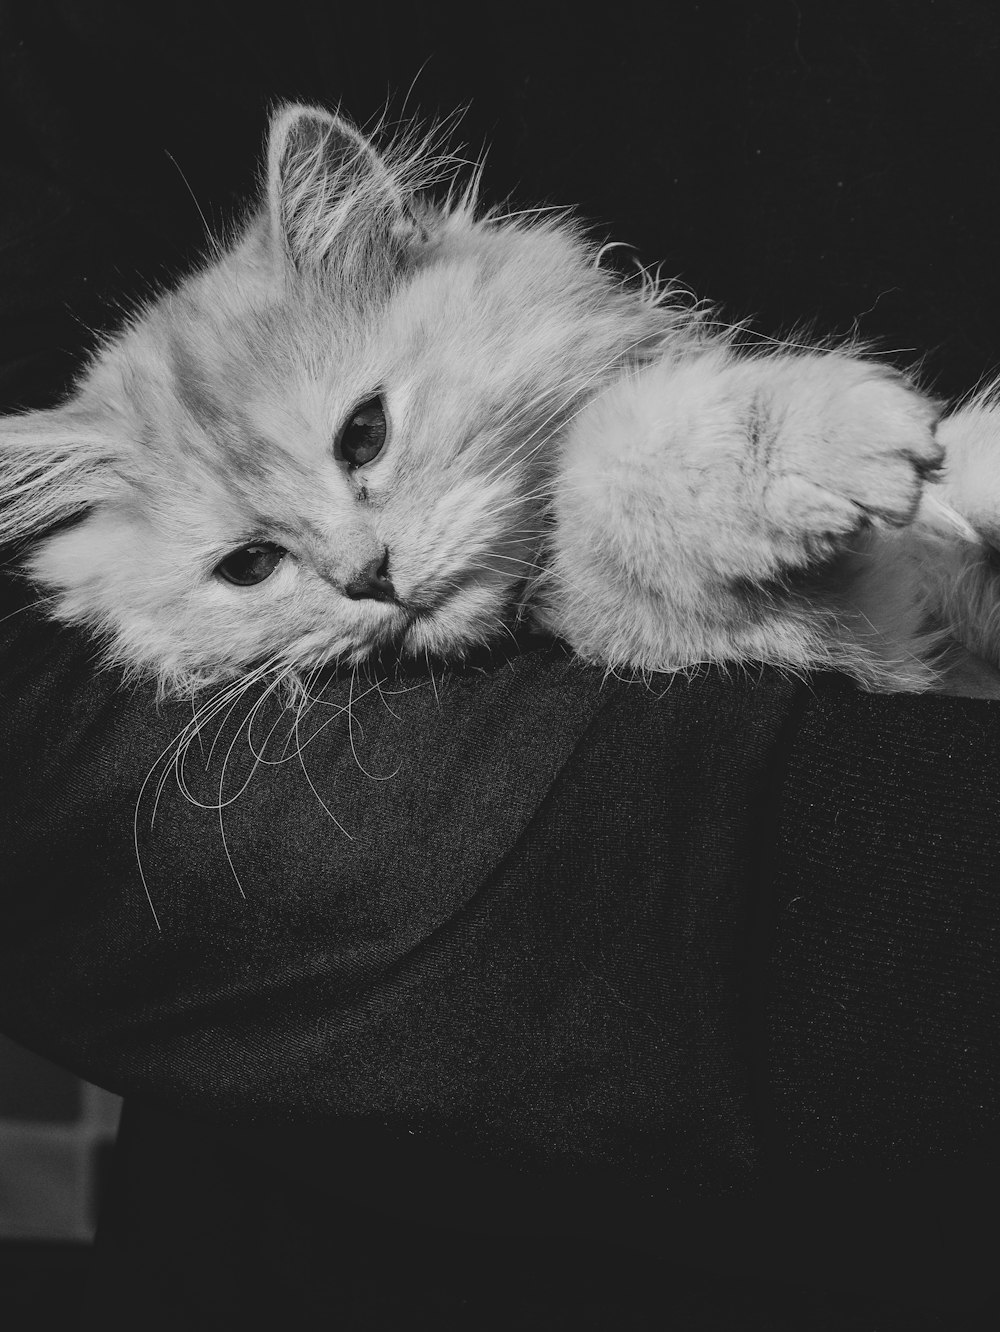 a black and white photo of a cat being held by someone